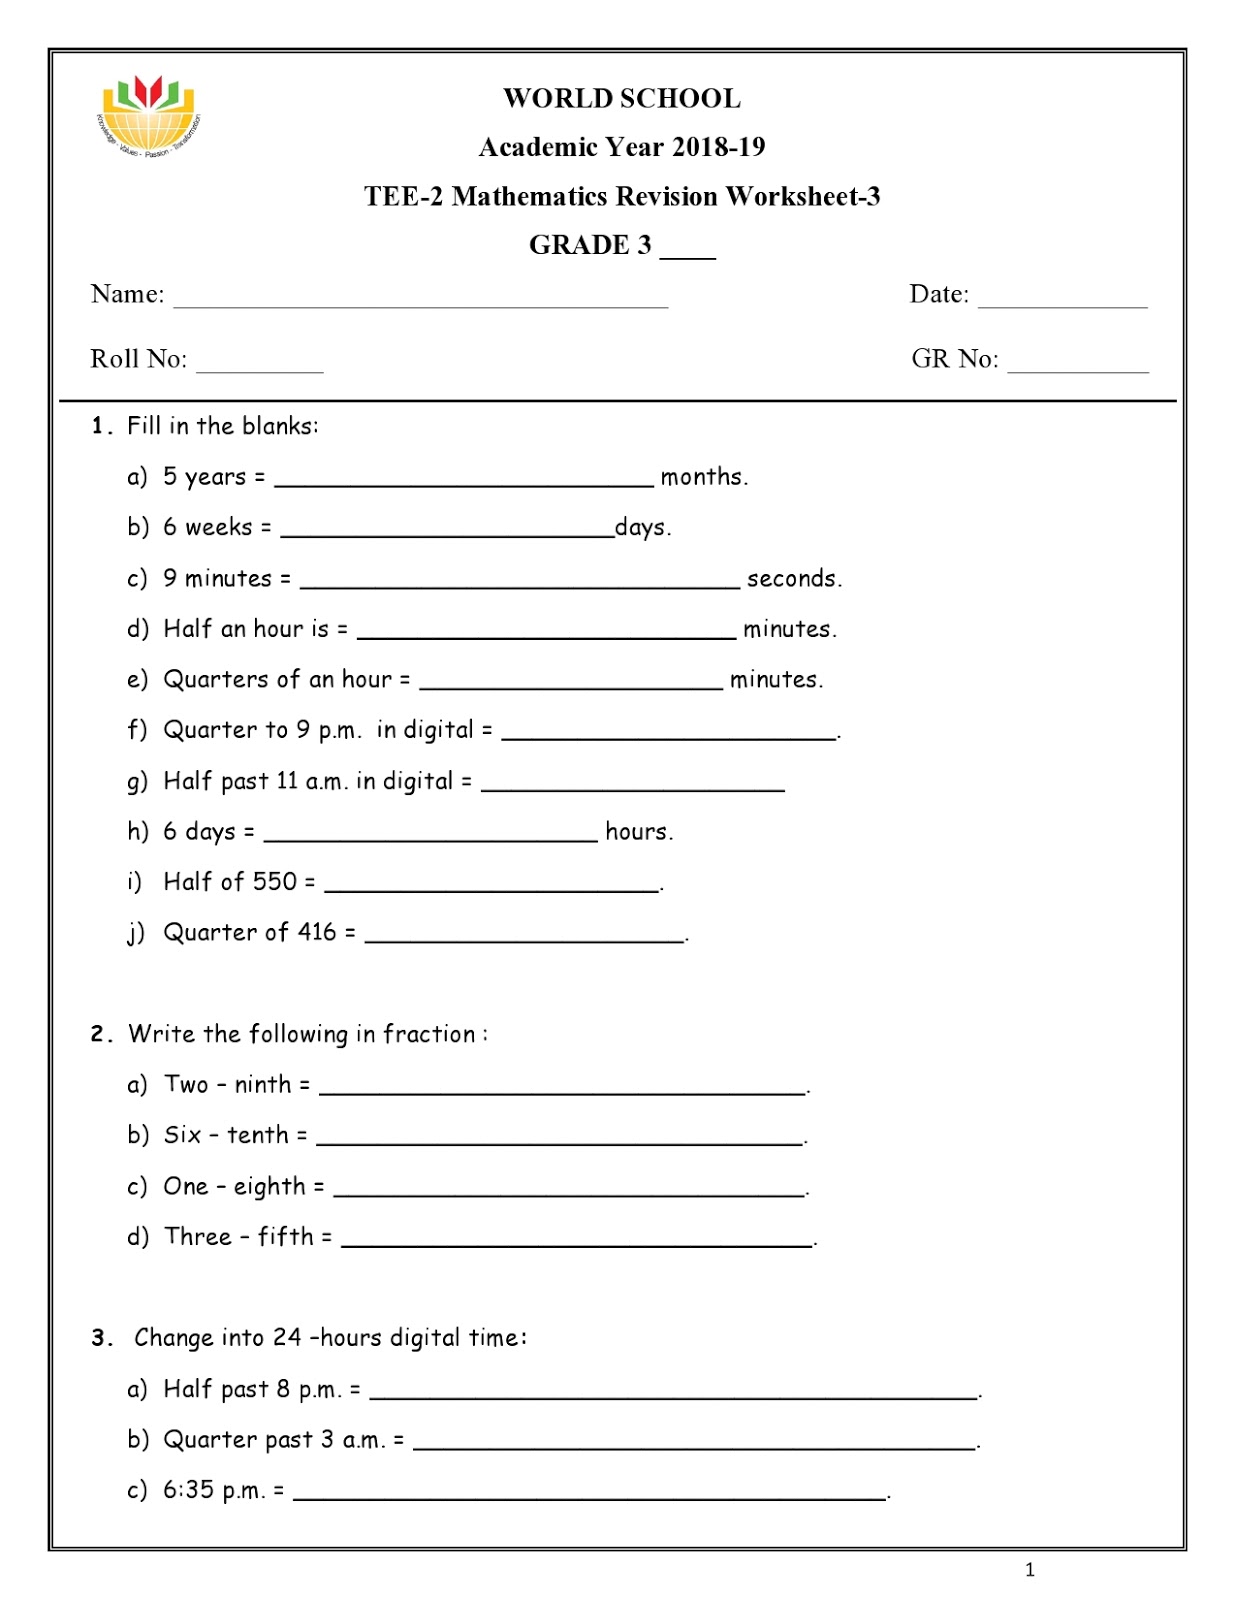 Revision Worksheets For Grade 3 As On 09 05 2019 WORLD SCHOOL OMAN